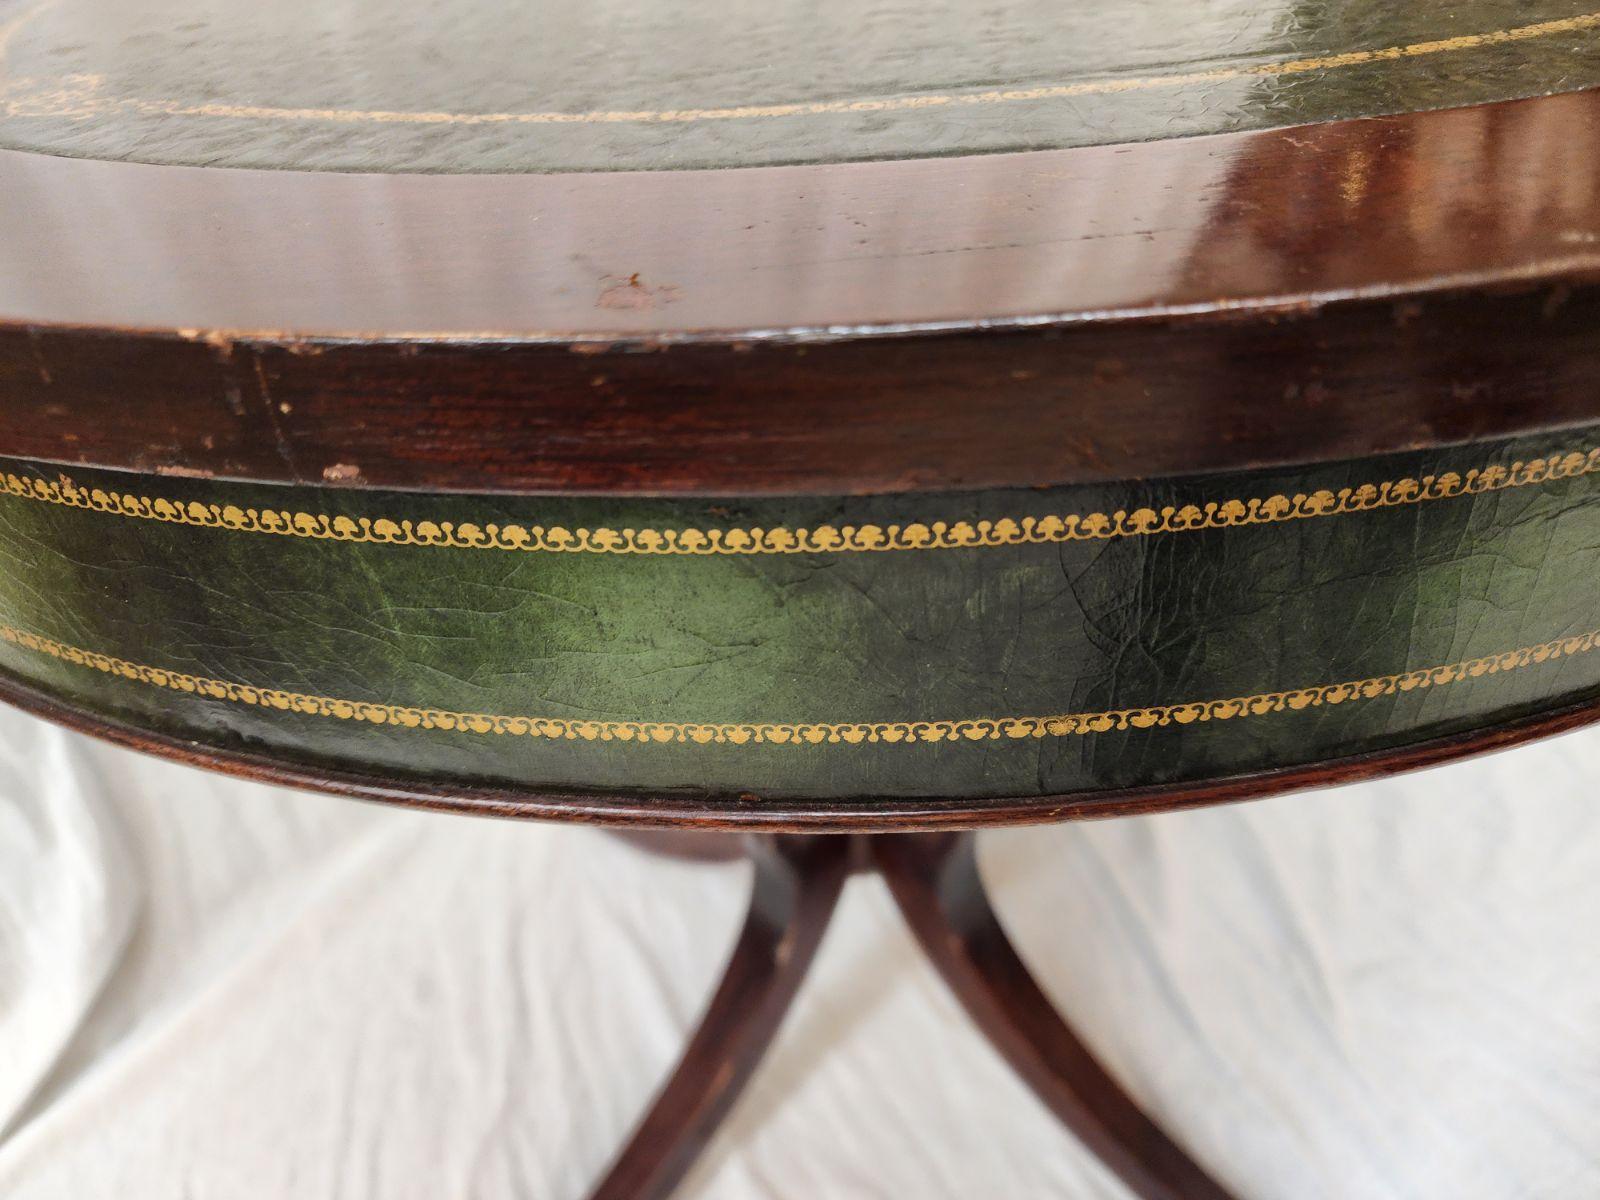 Beautiful and Unique Antique Vintage Green Leather Top Large Drum Table, Duncan Phyfe Style, Base with Brass paw feet, on casters